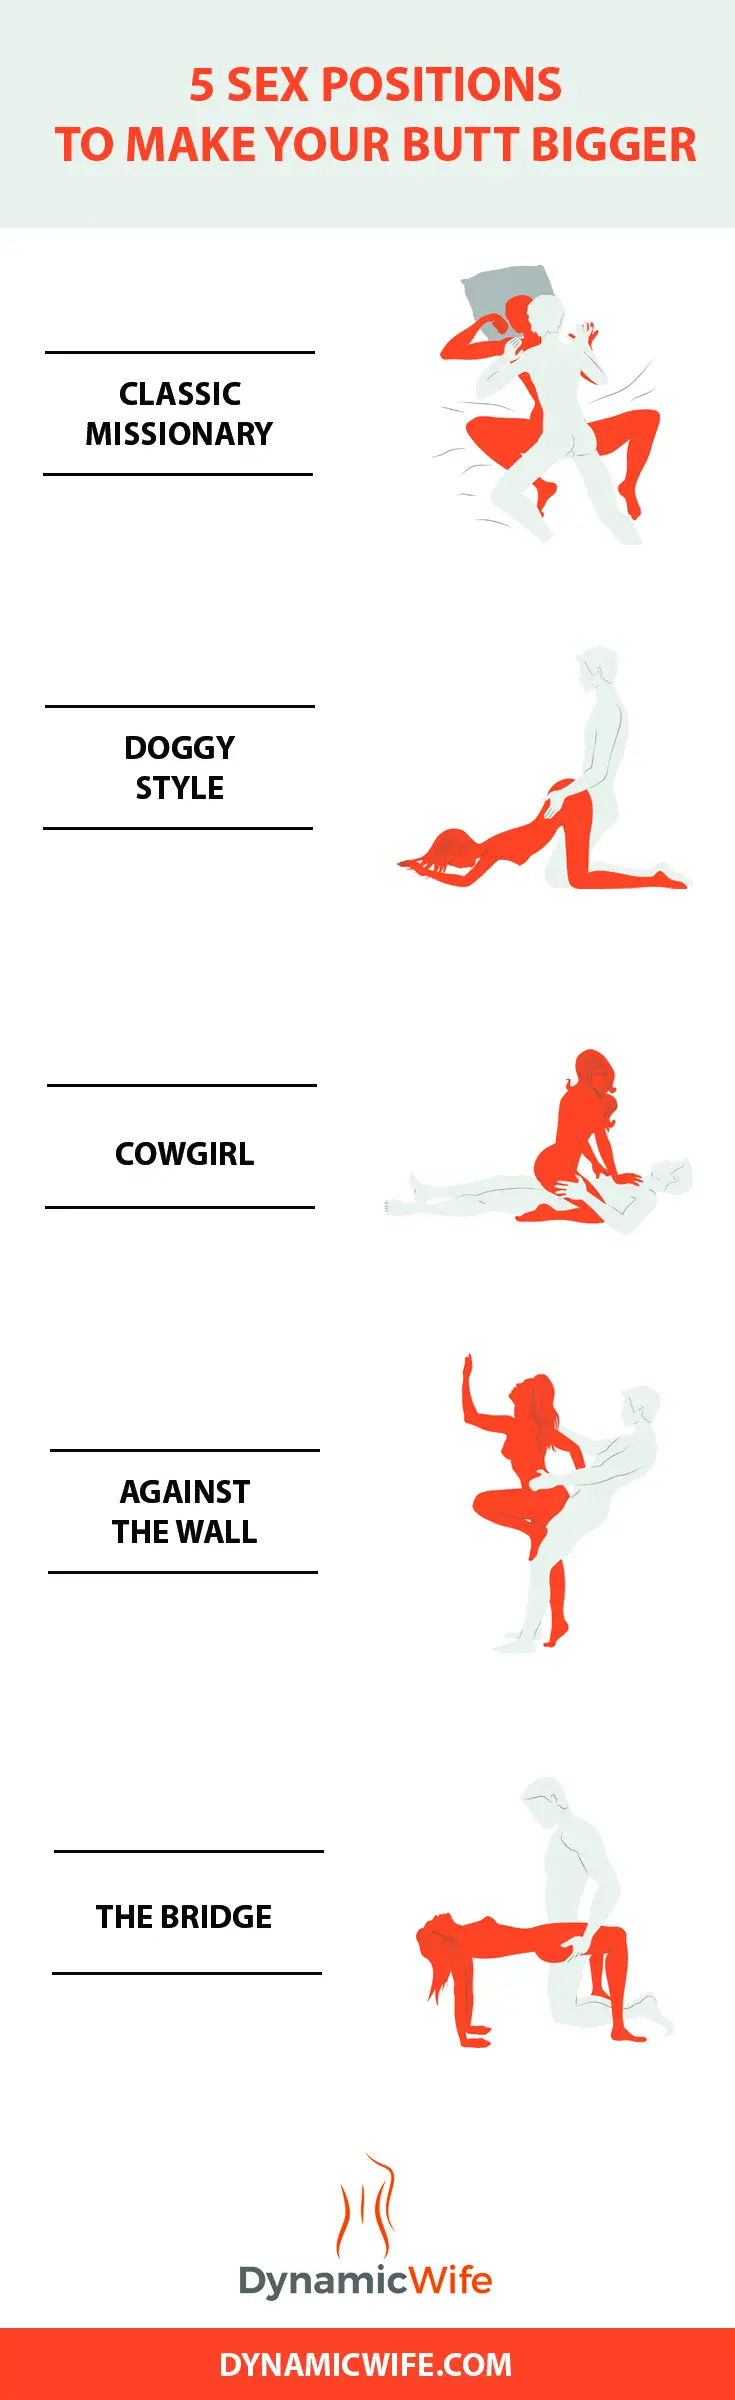 Infograph - Does Sex Make Your Butt Bigger? 5 Positions with Photos